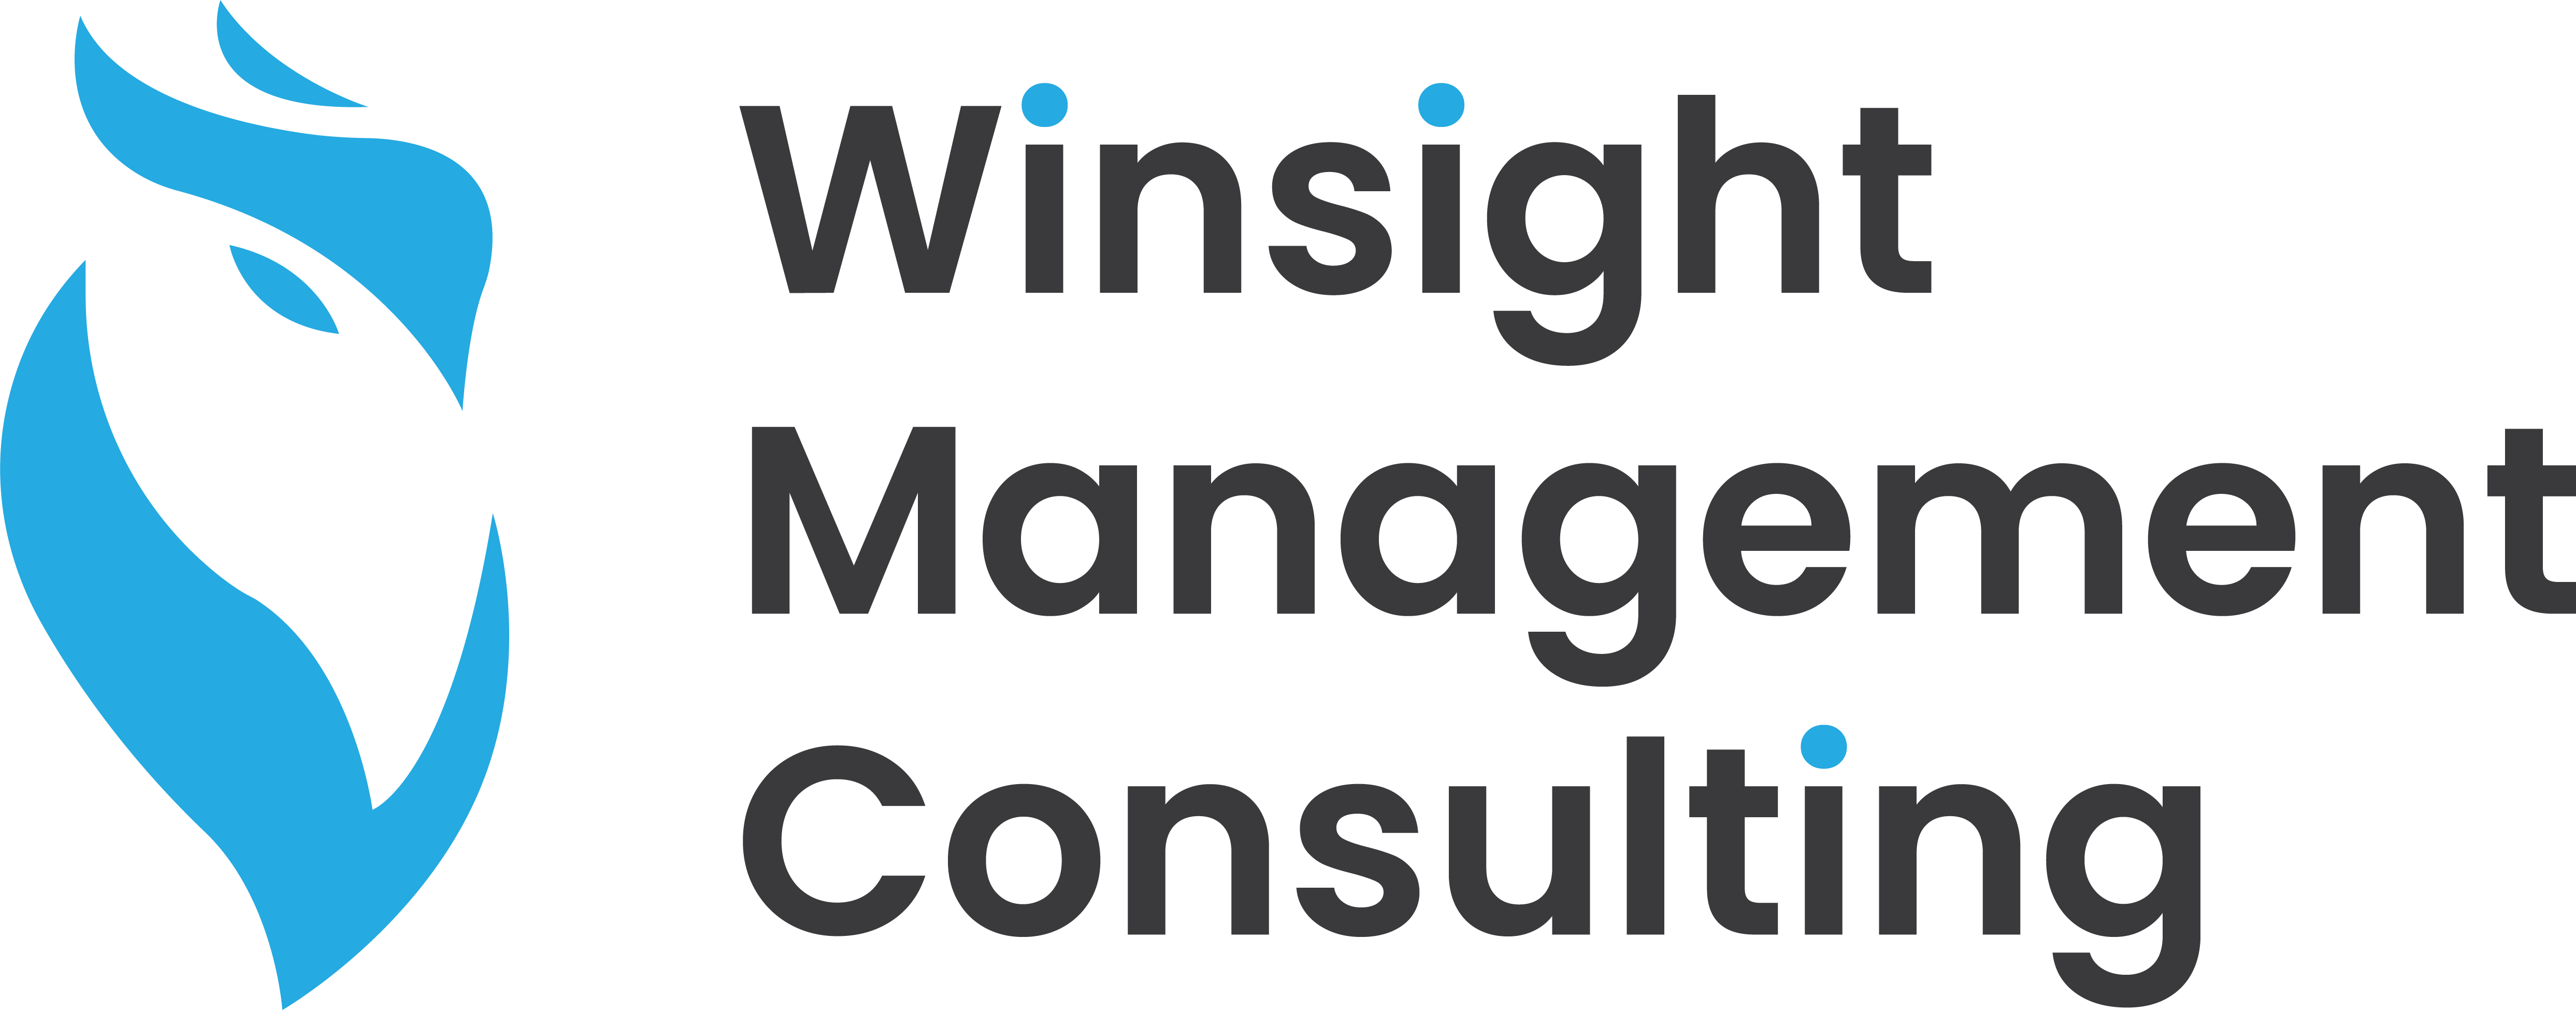 Winsight Management Consulting Inc.